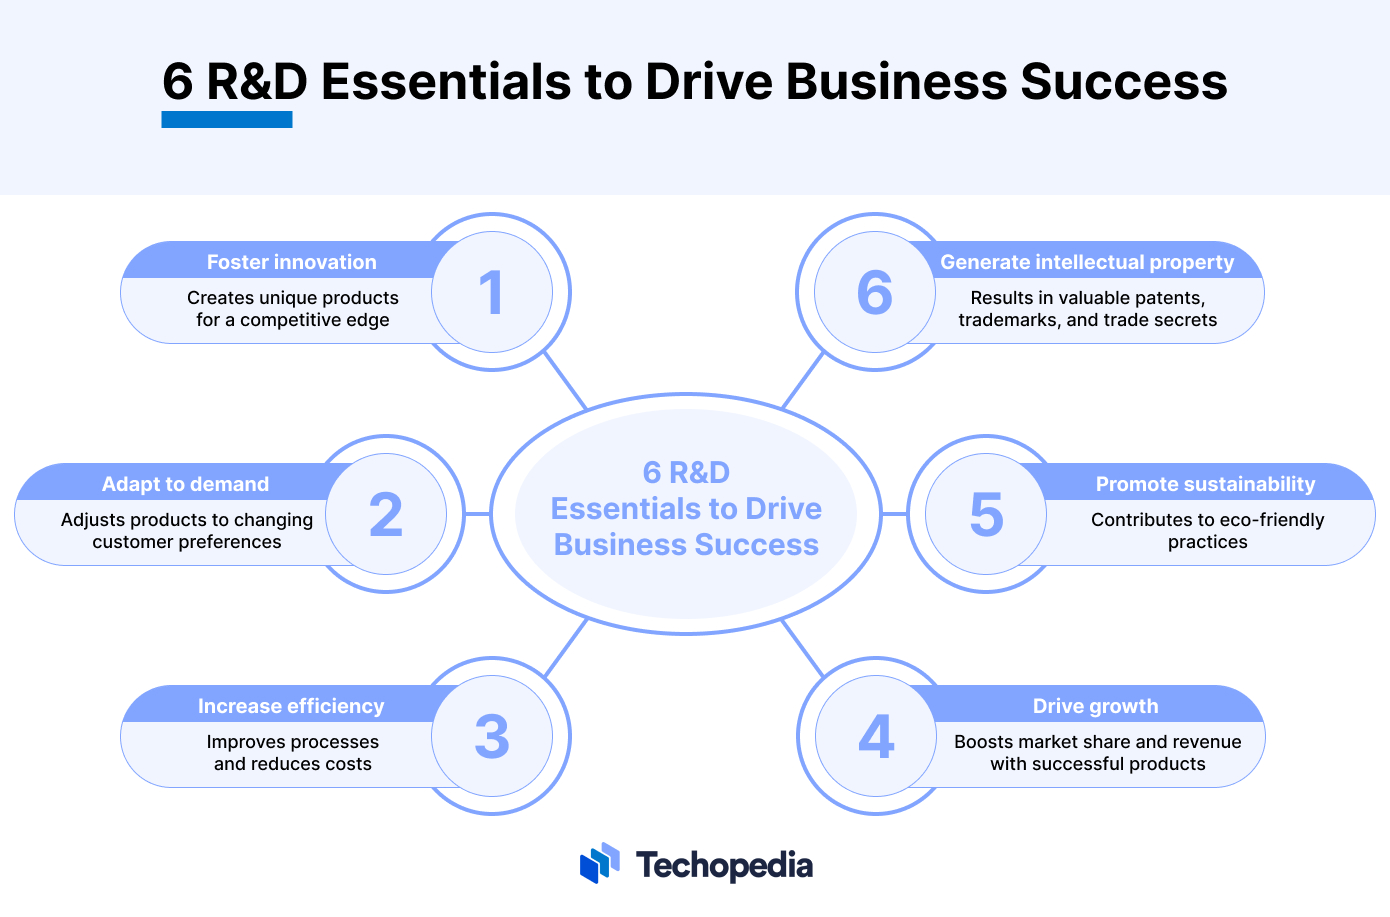 6 R&D Essentials to Drive Business Success